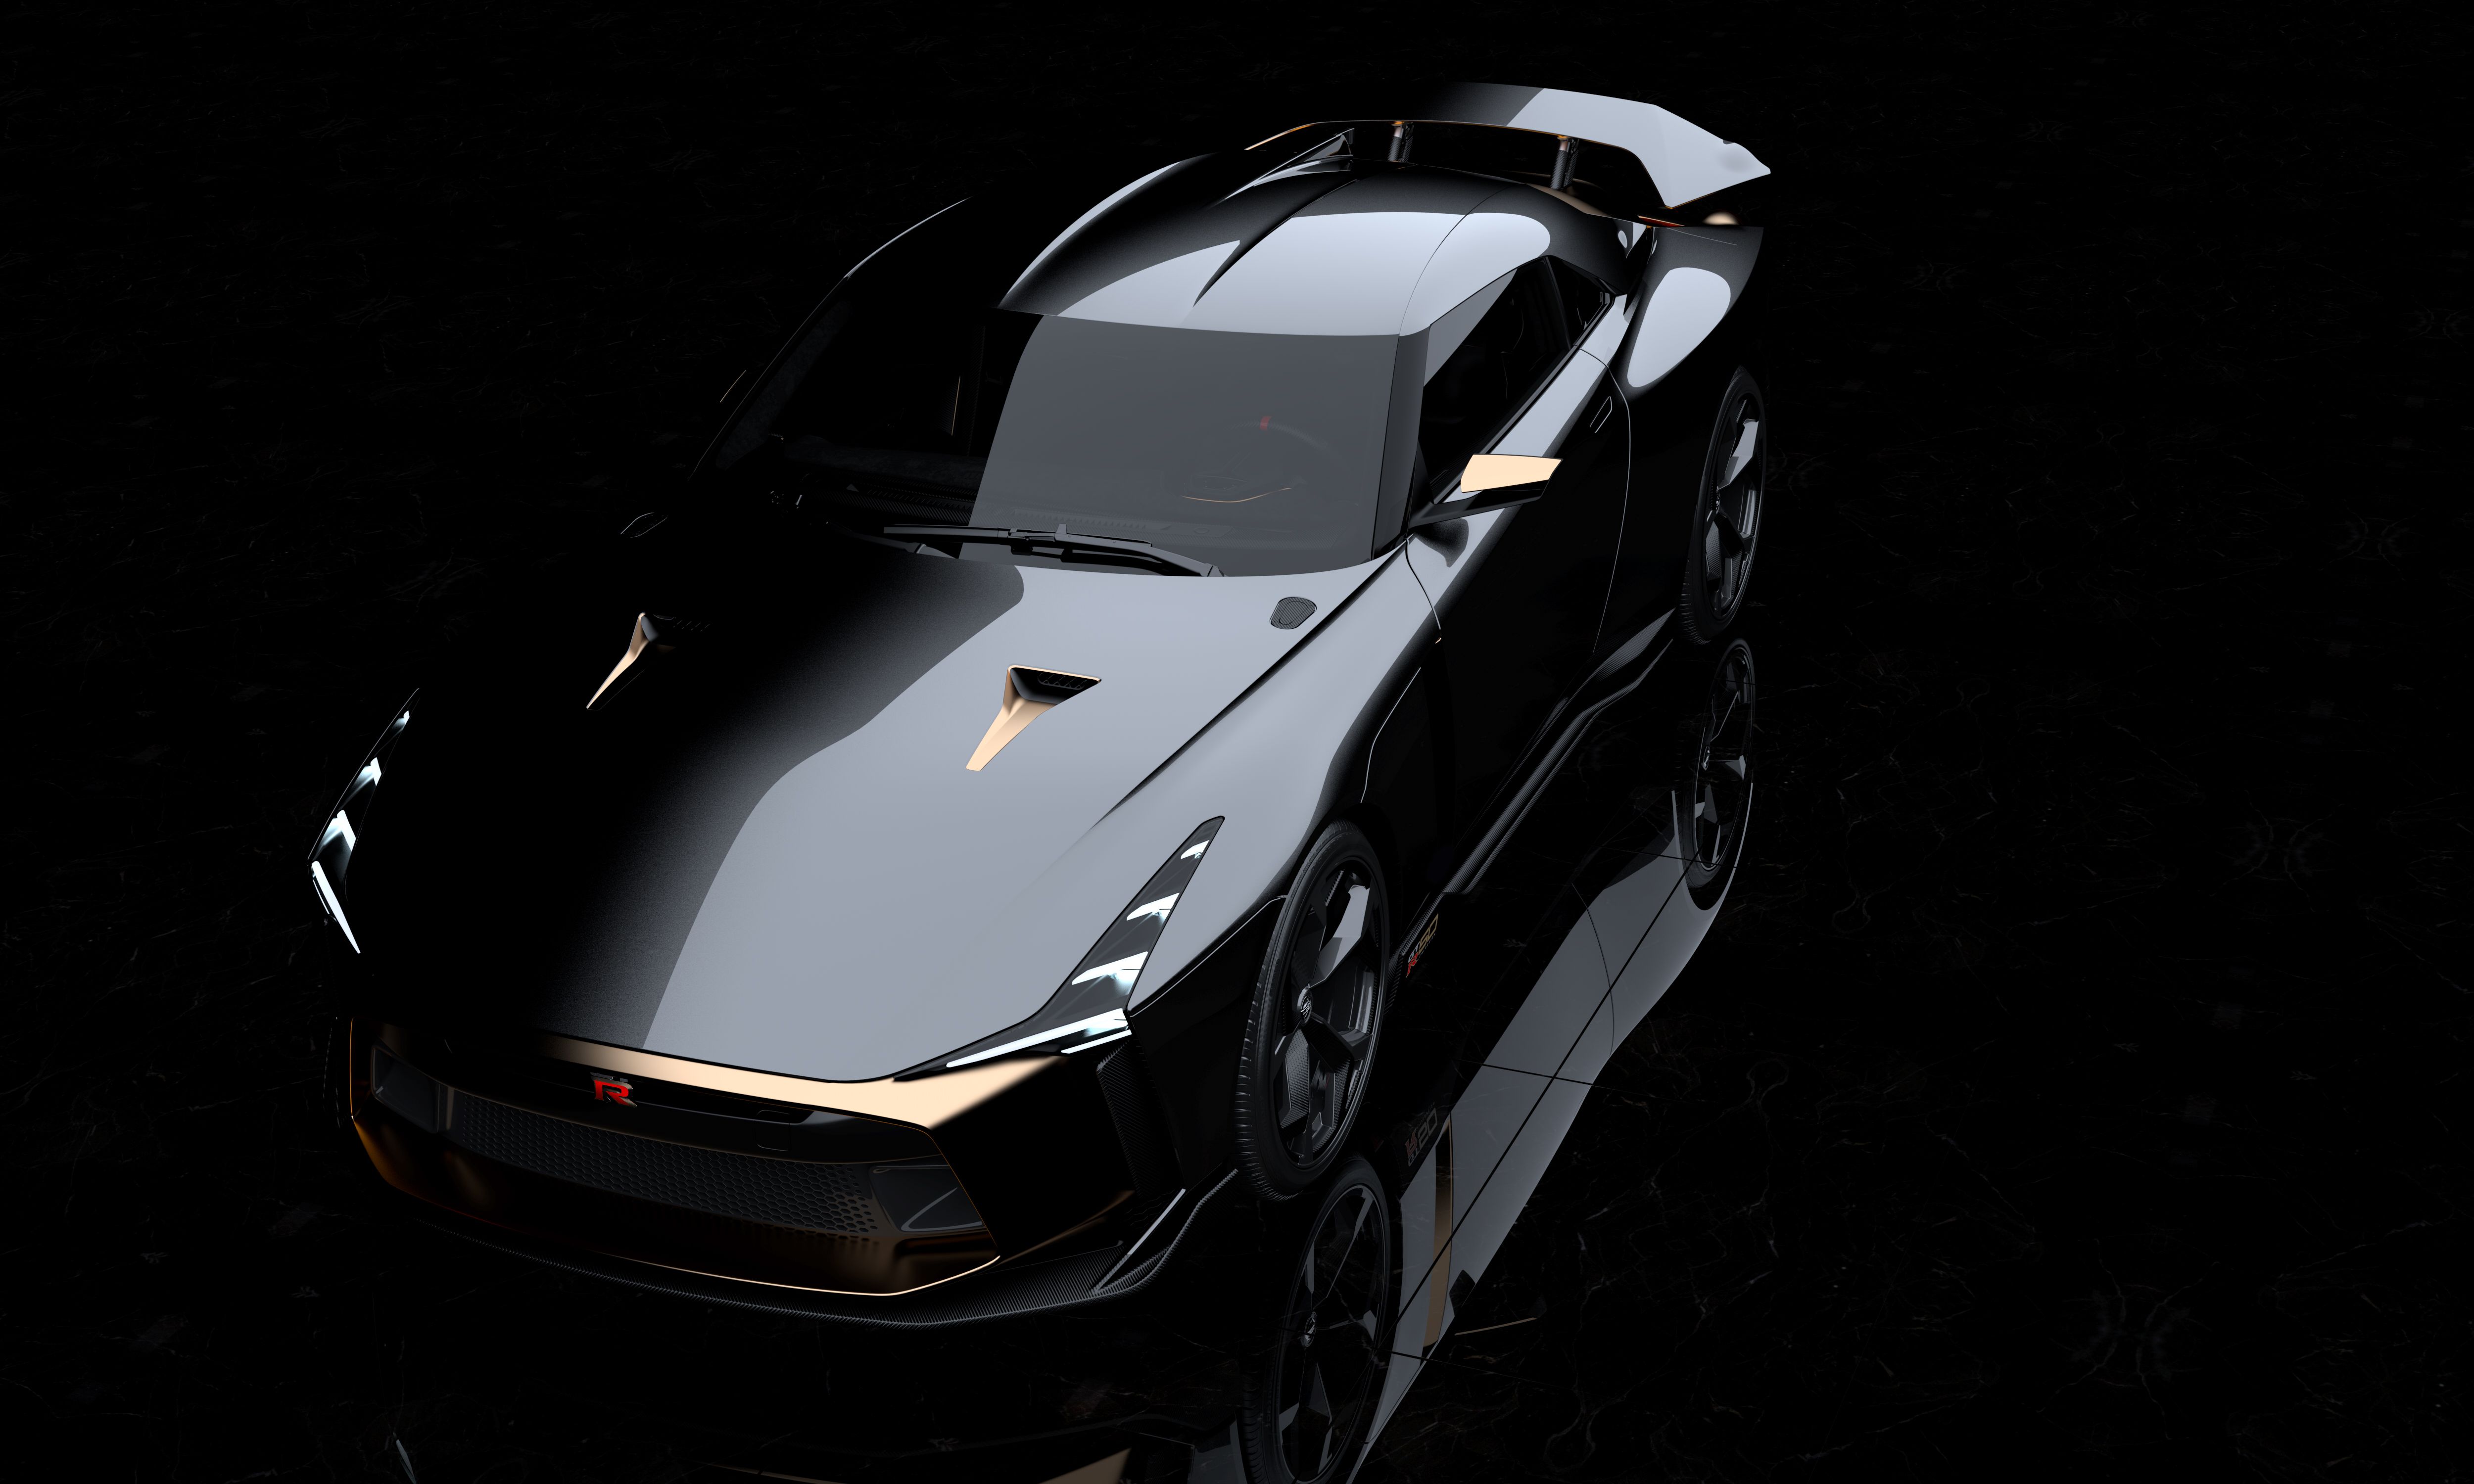 Italdesign May Build Fifty 720HP Nissan GT-R50s